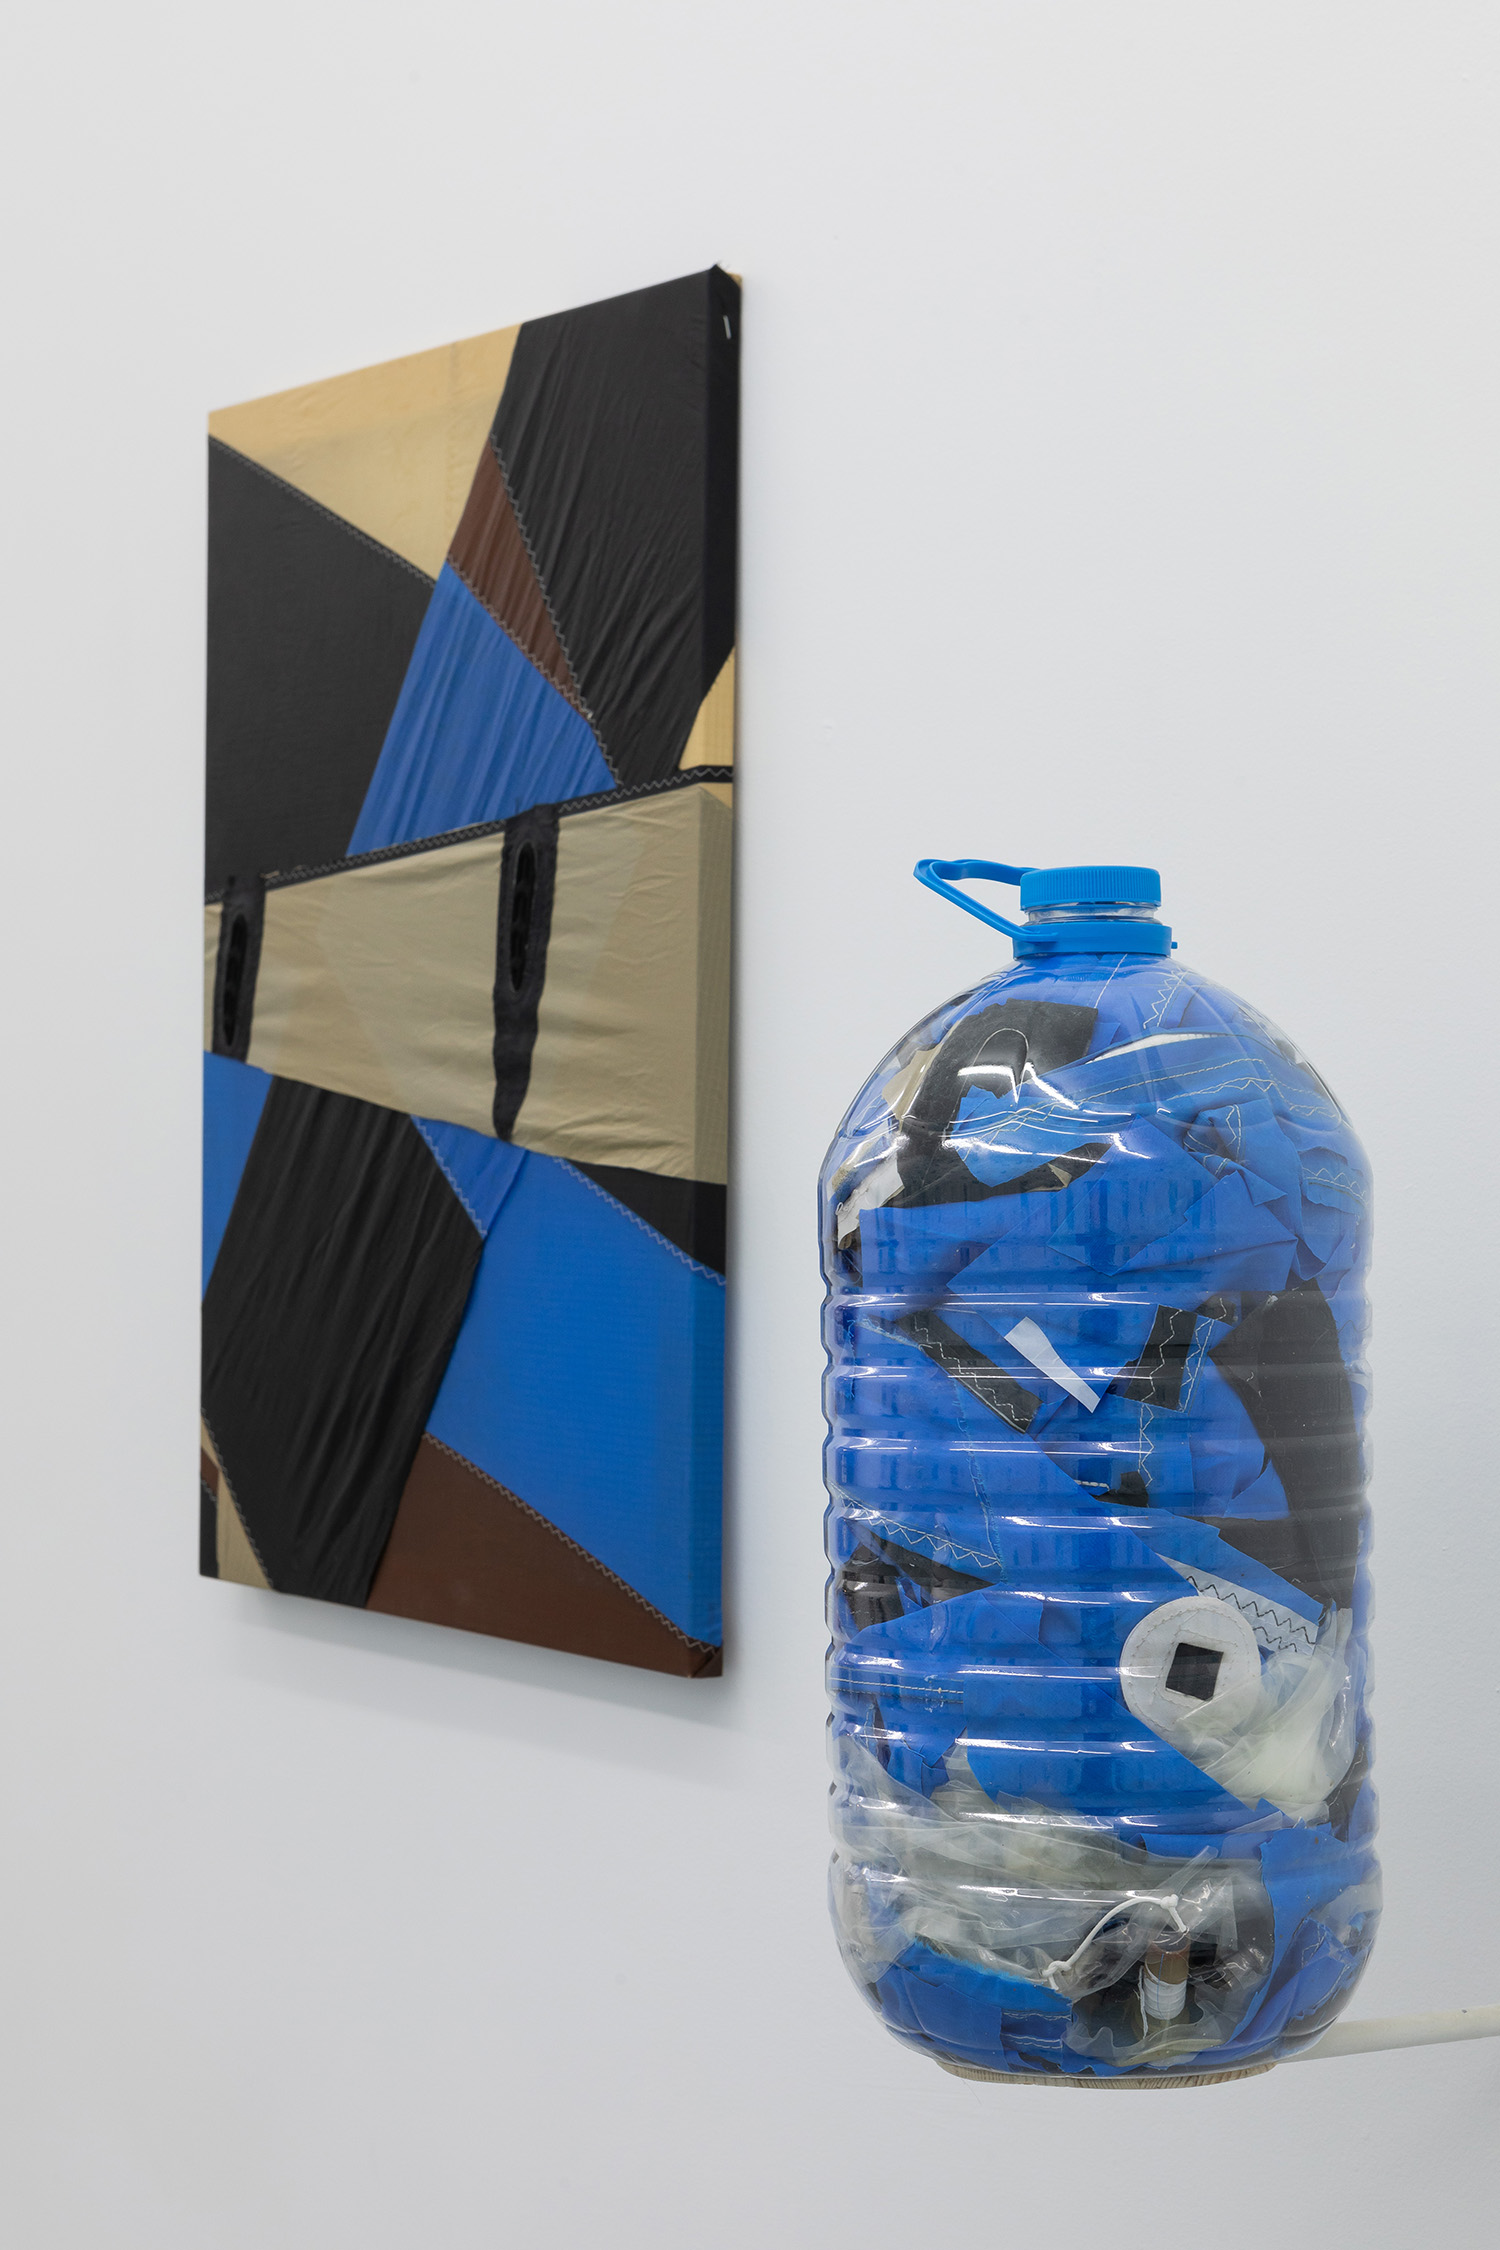 Naish Fild, 2021. Kite fabric on frame and 10 litres plastic bottle, parts from kite. 70 x 50 cm + bottle 42 x 19 cm